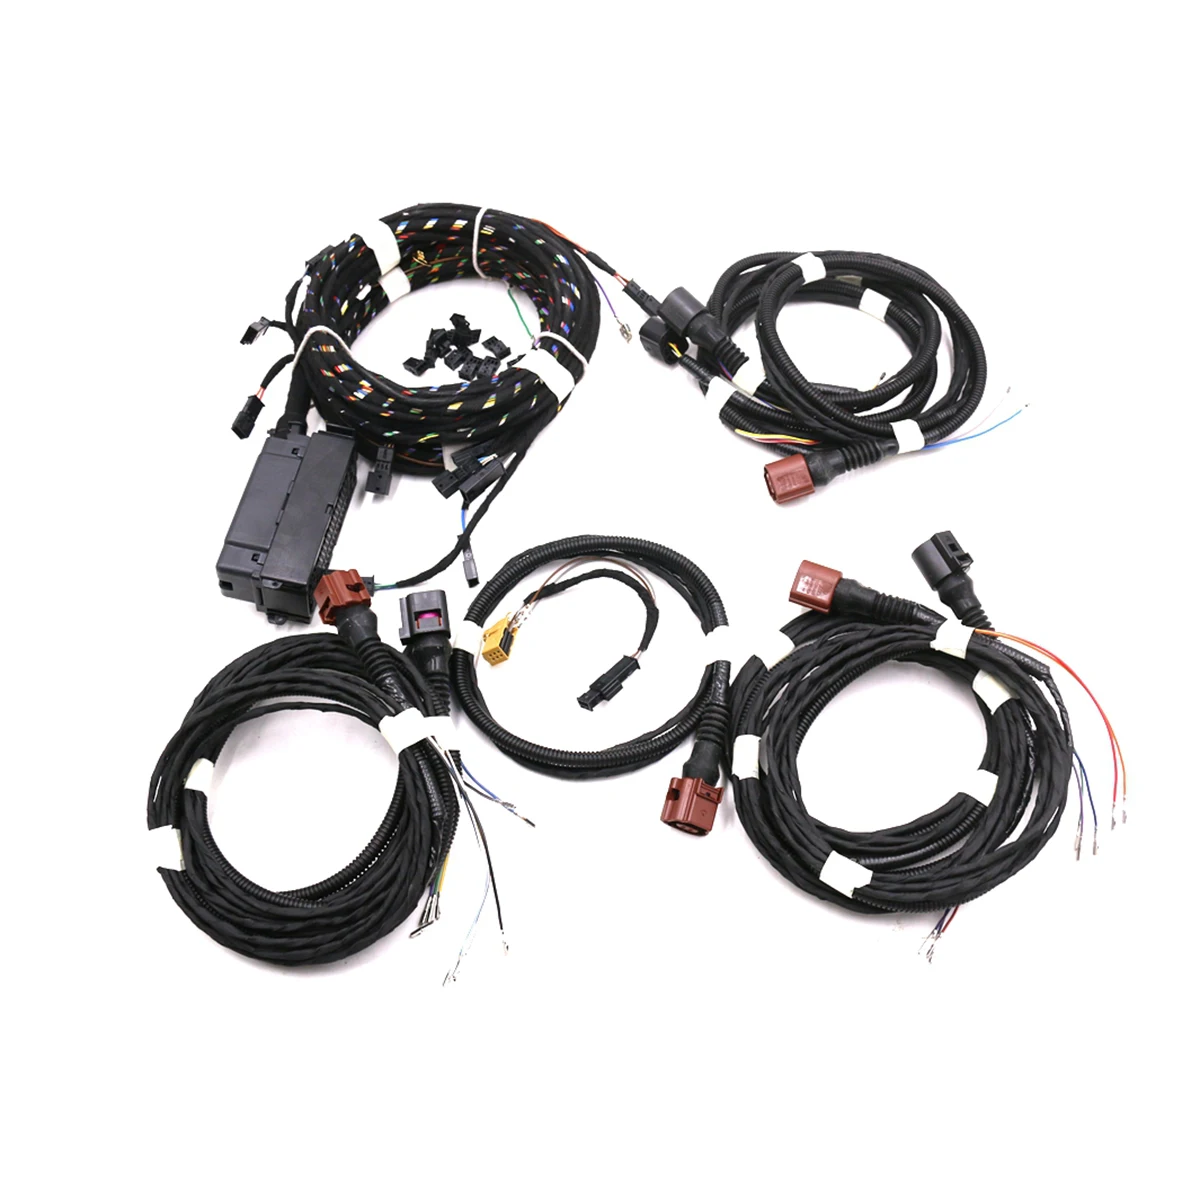 FOR Tiguan Jetta Golf MK6 Passat B7 DCC Dynamic Chassis Control Install Wire cable Harness